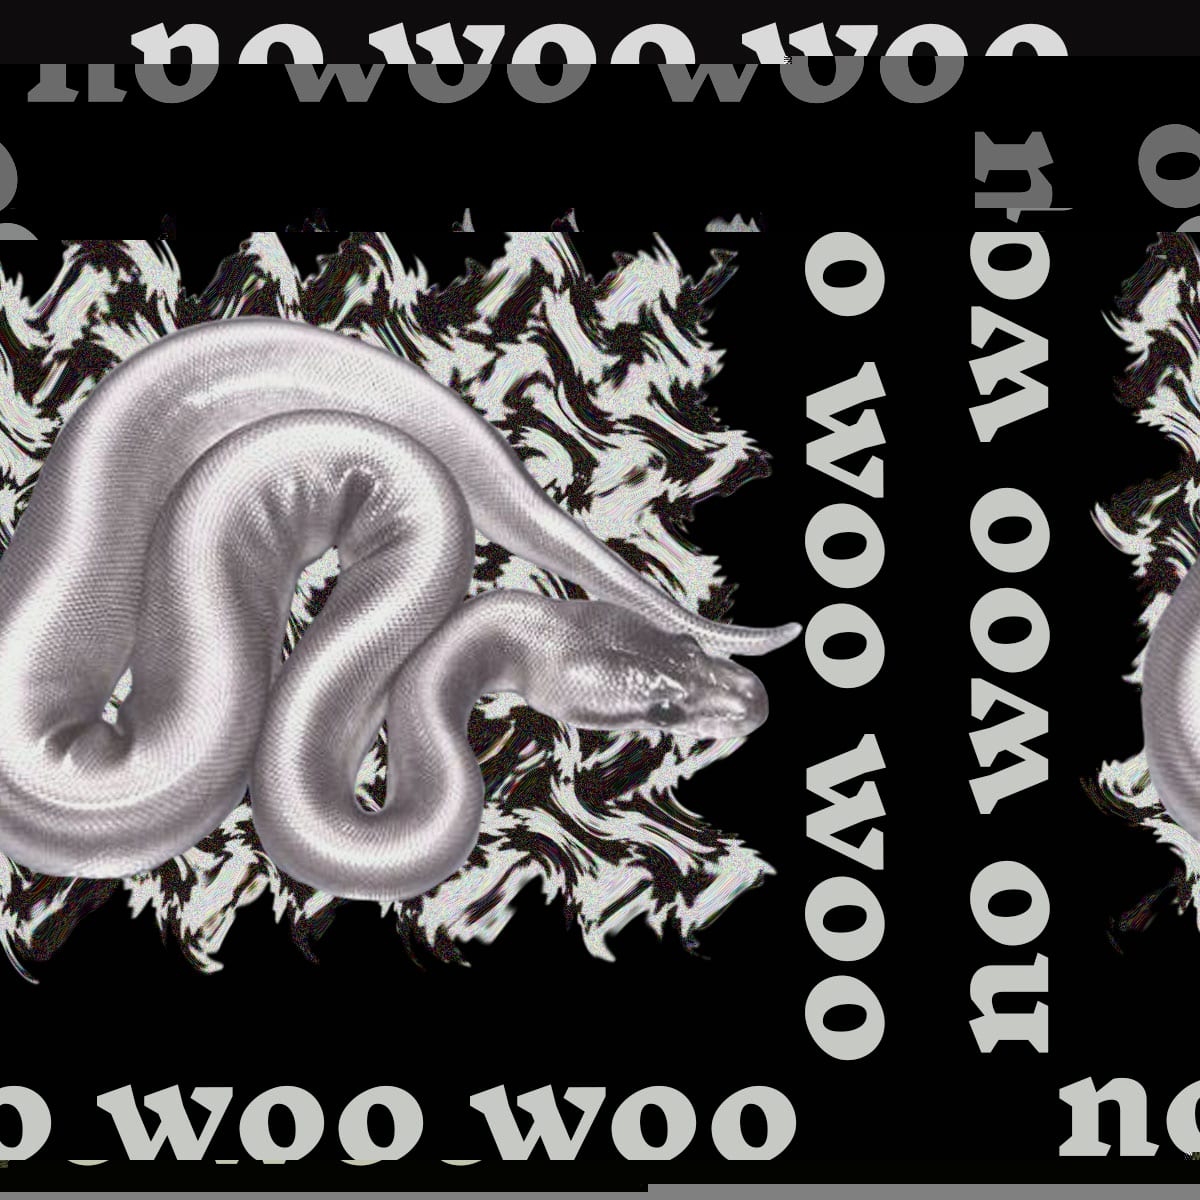 first glitch of graphic for No woo woo radio show